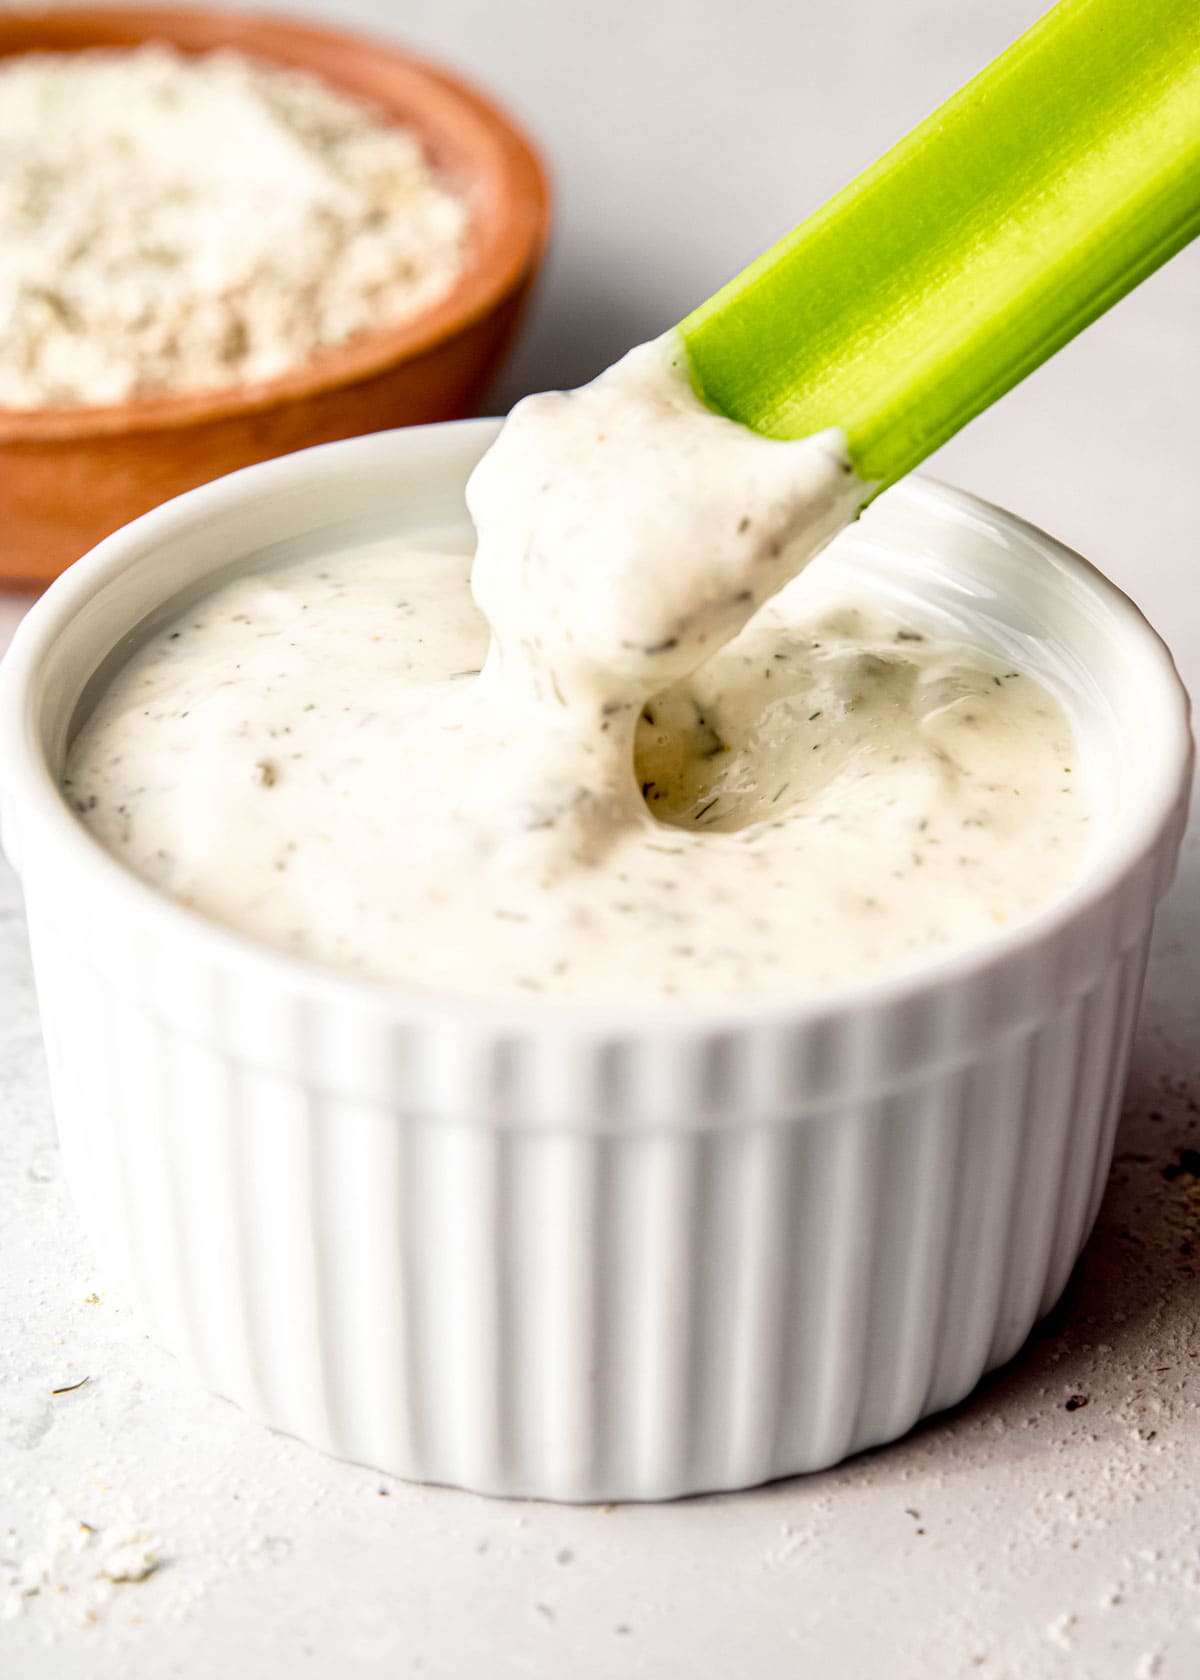 image of celery stick being dipped in ranch dressing in a white bowl